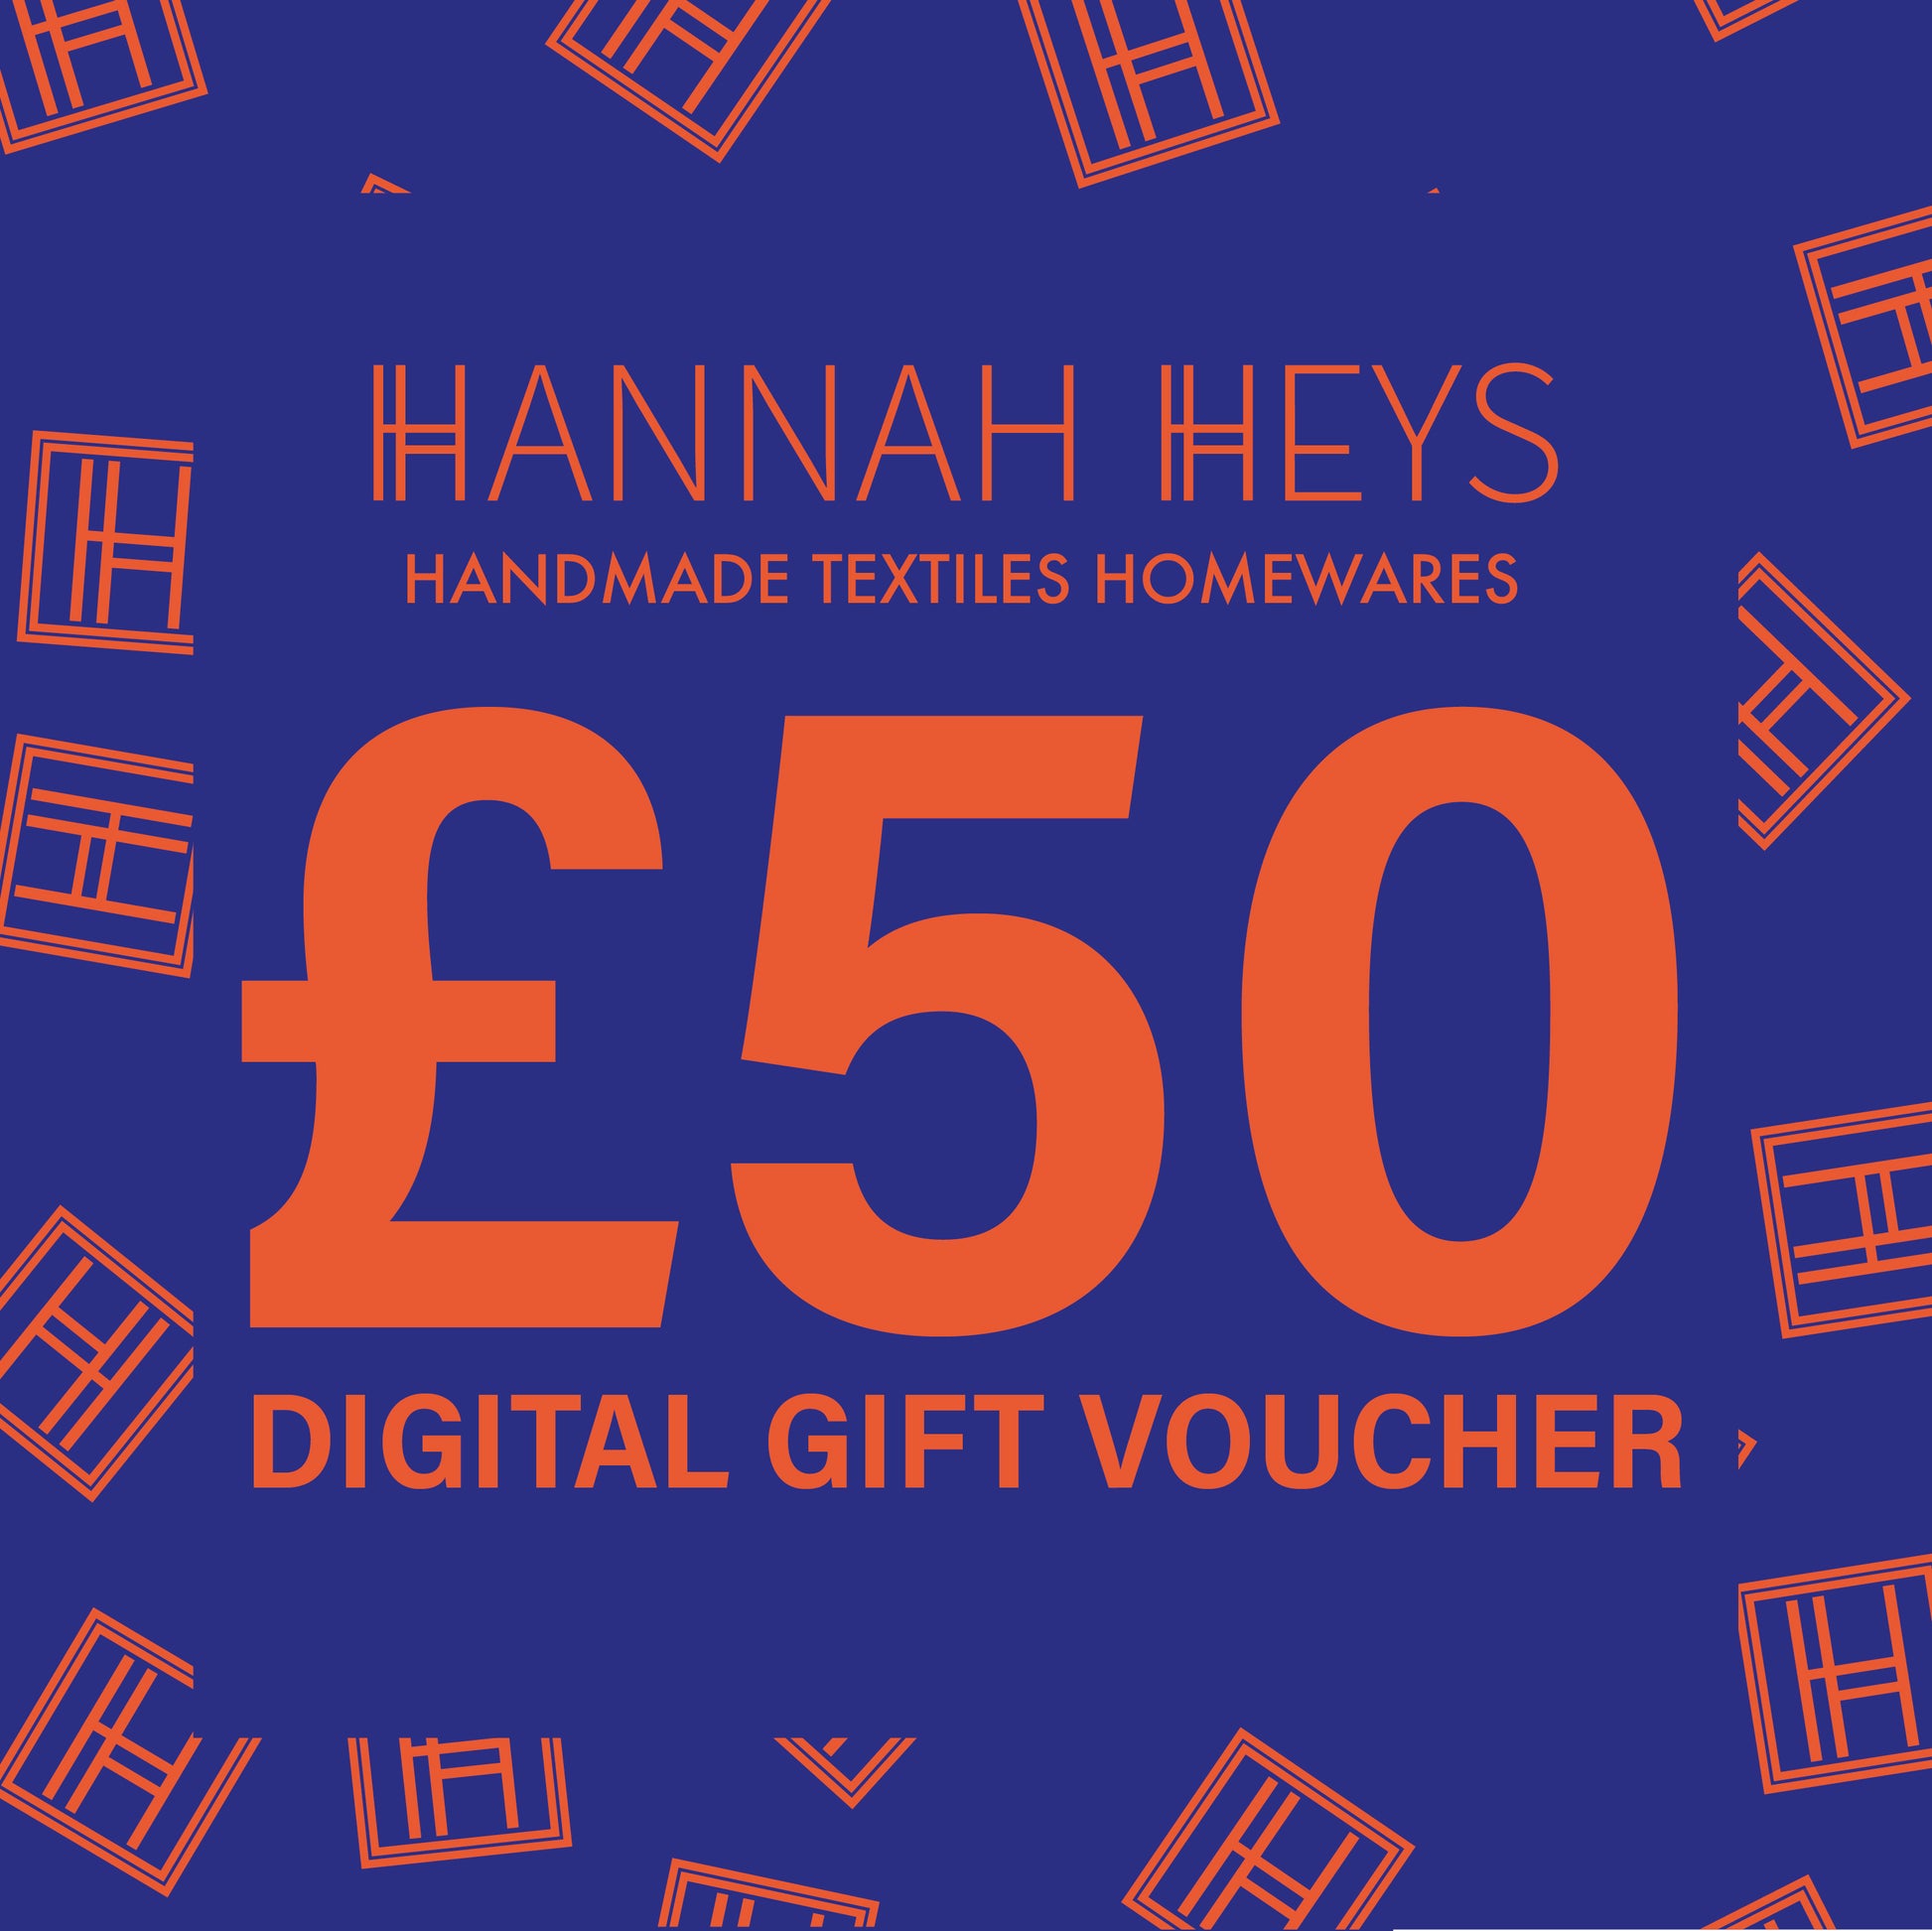  Royal Blue Image with Bright Orange Lettering, advertising a £50 Digital Gift Voucher for Hannah Heys Textiles.